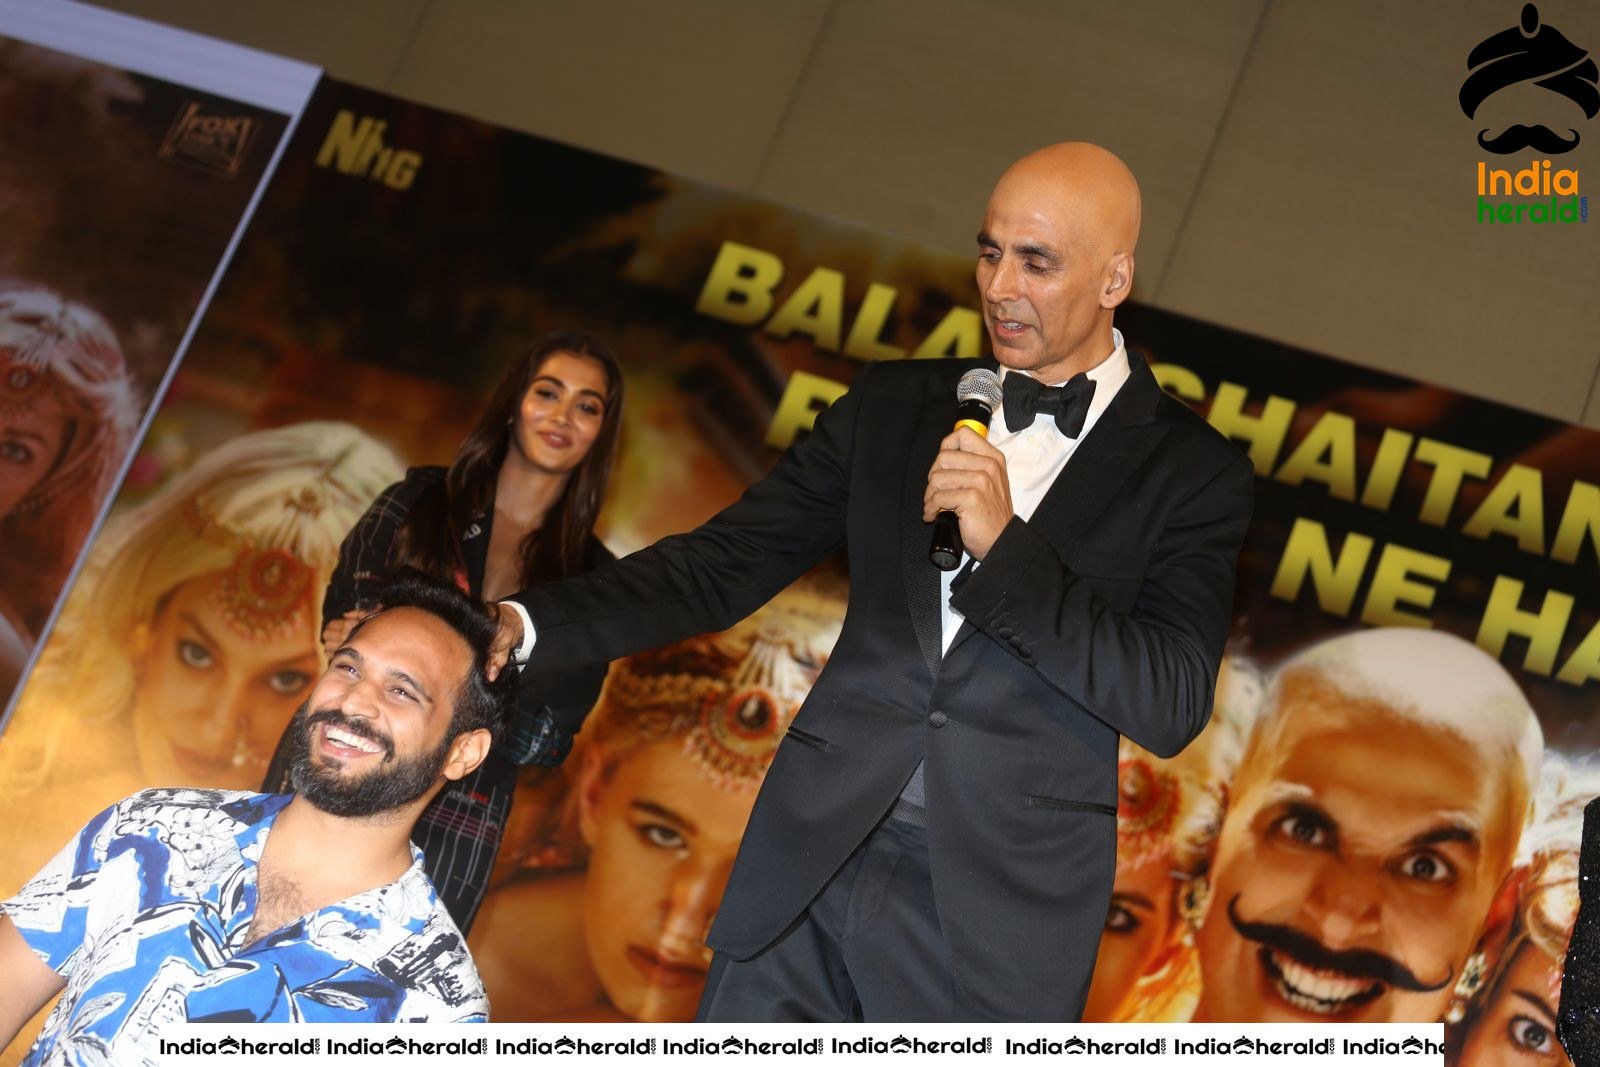 Akshay Kumar seen with Fully Tonsured Head at an event Set 1